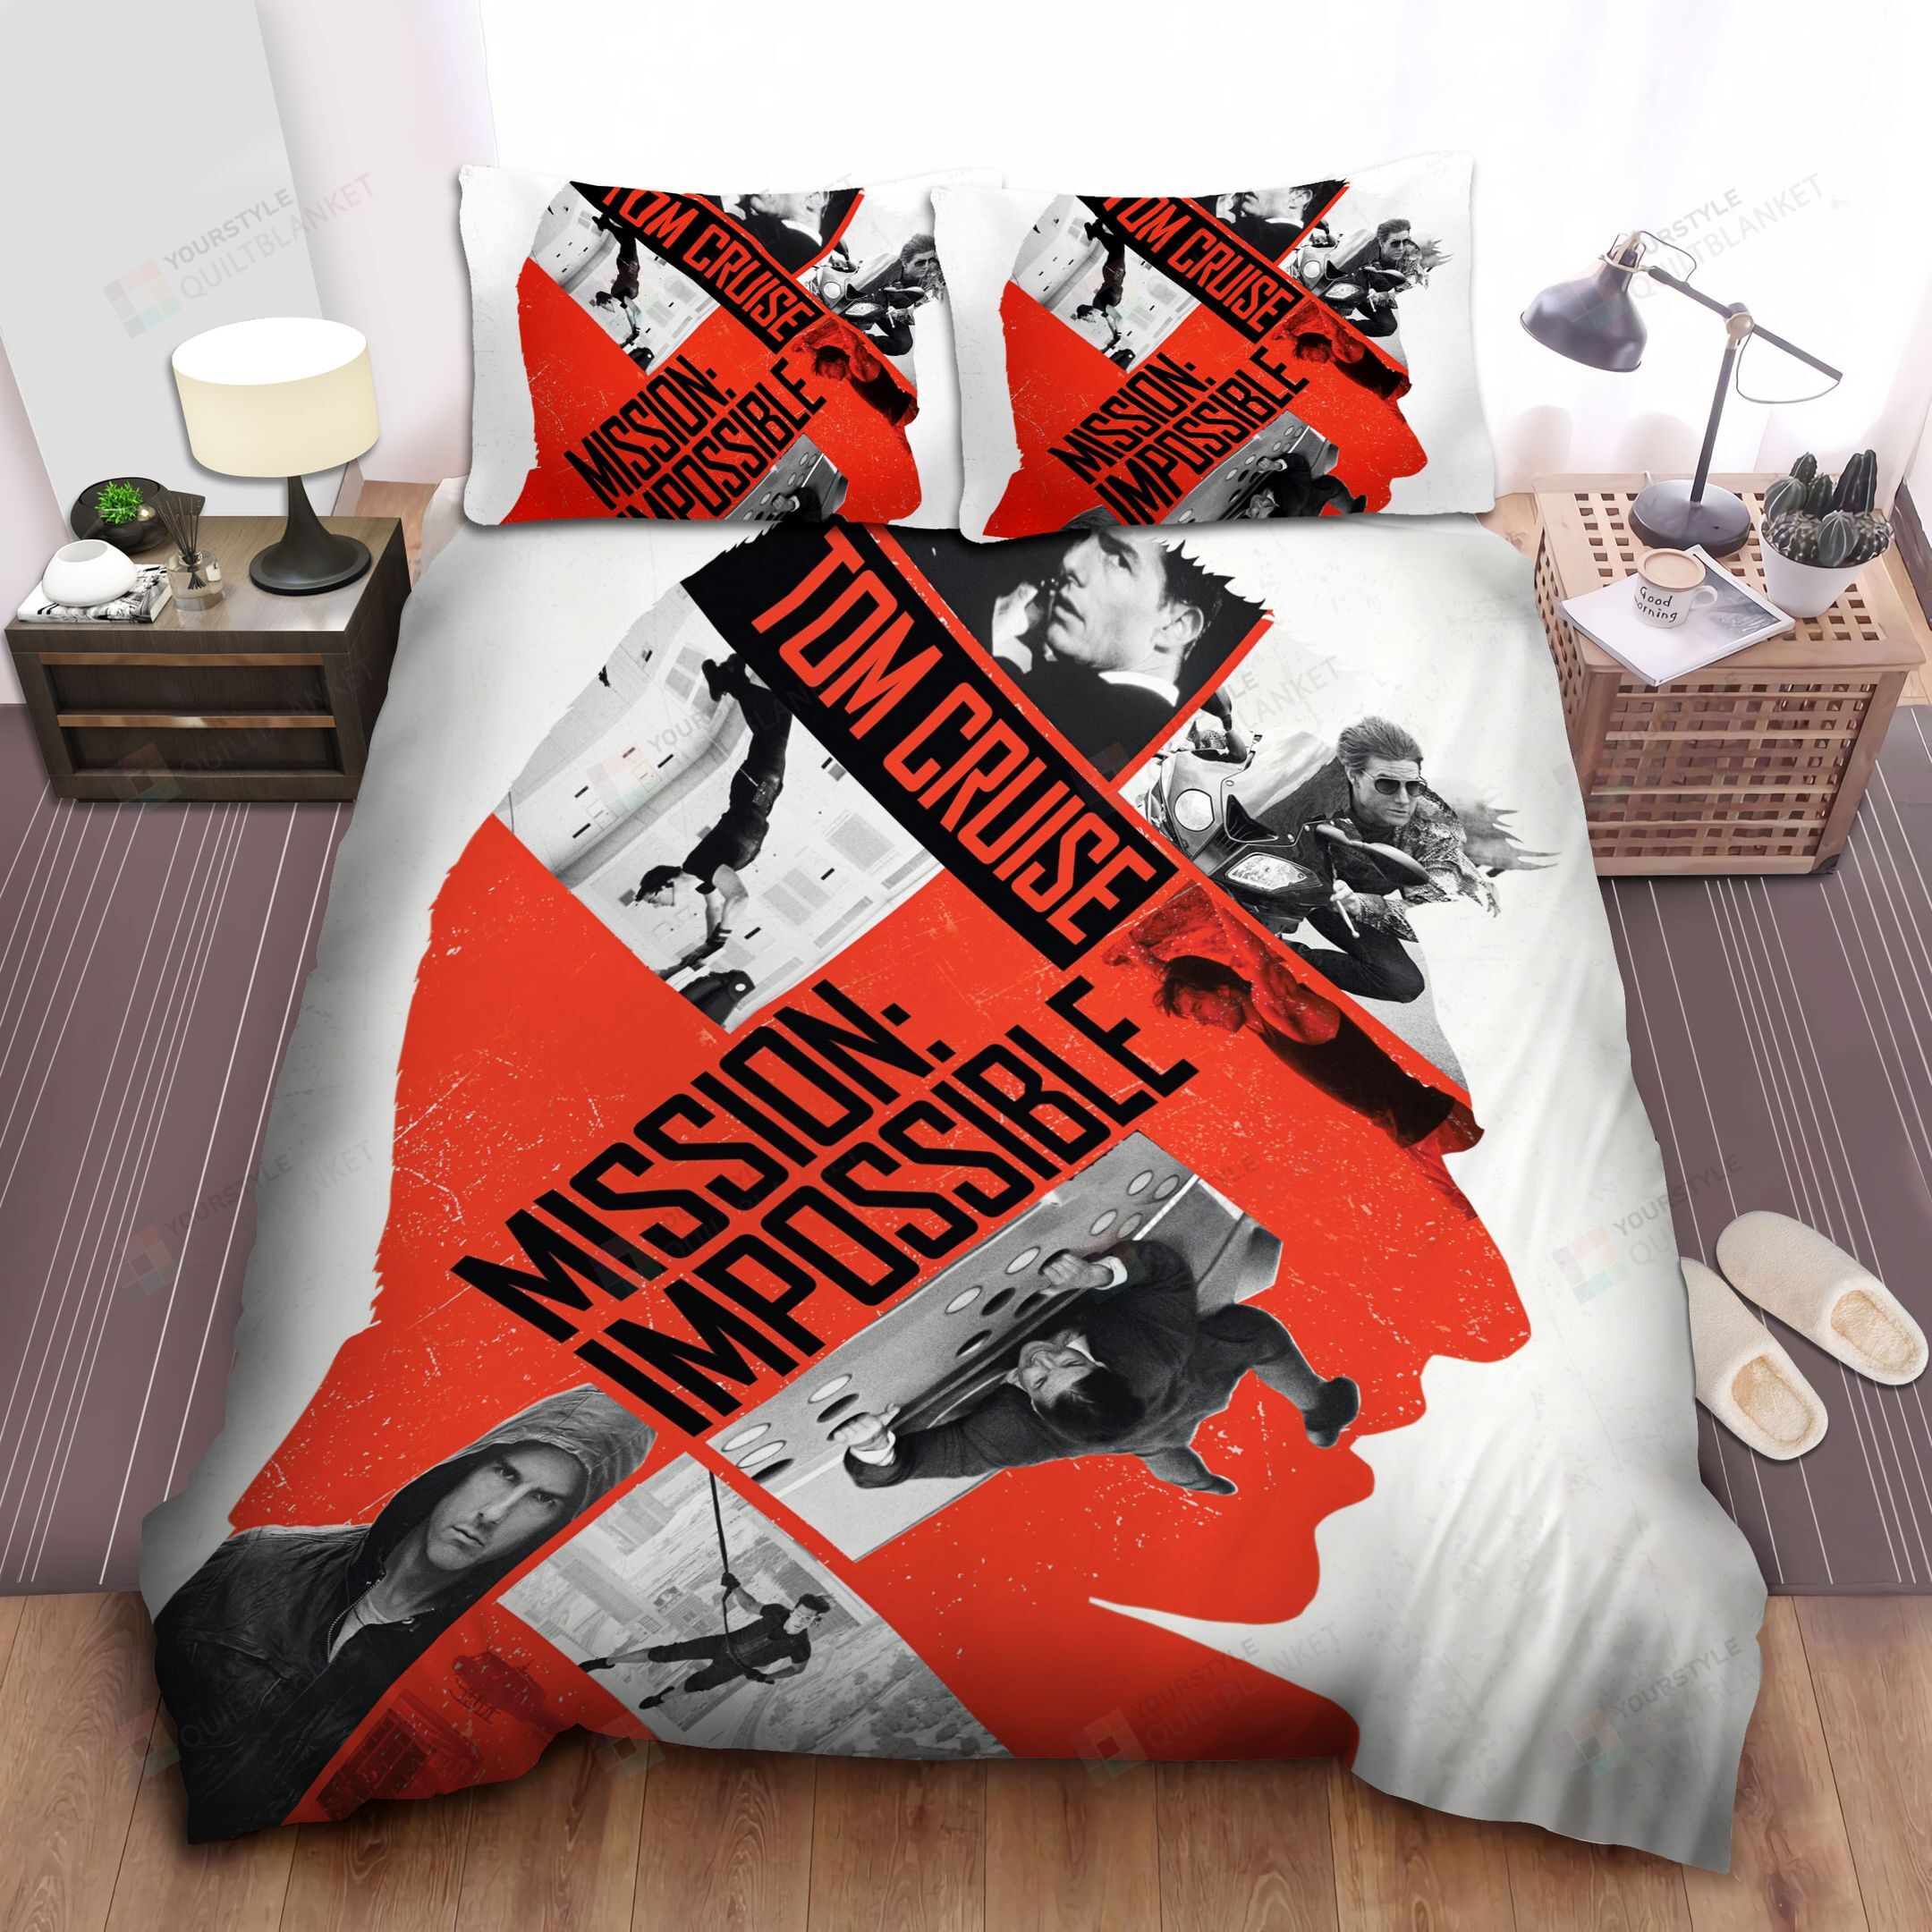 Mission Impossible Collection Bed Sheets Spread Comforter Duvet Cover Bedding Sets